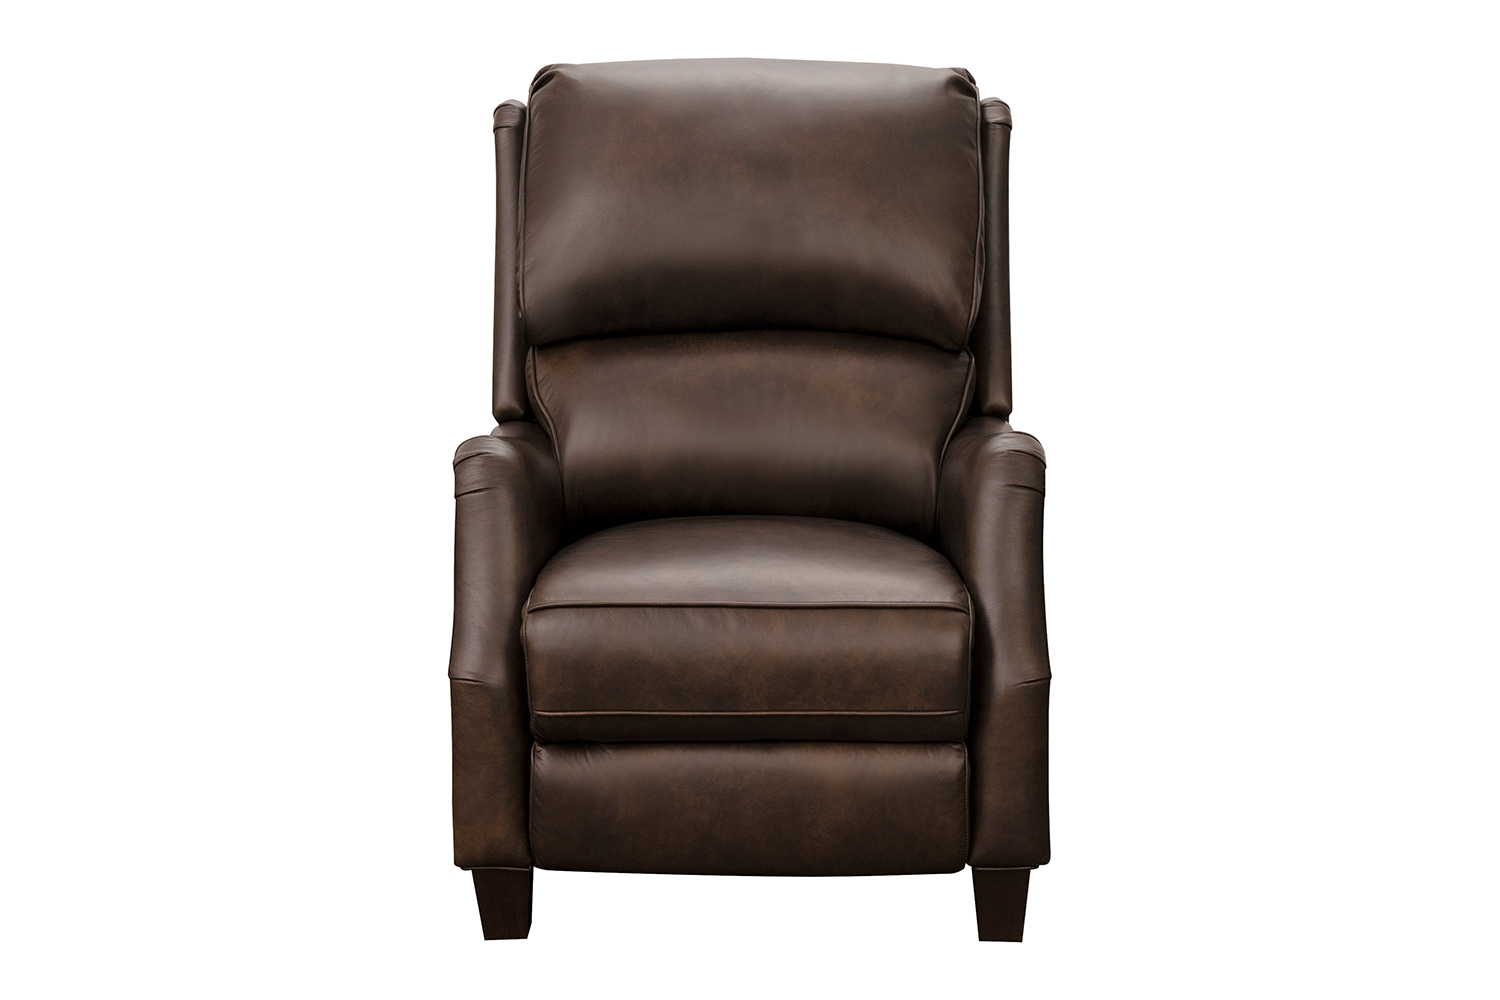 Barcalounger Morrison Big and Tall Recliner Chair - Ashford Walnut/All Leather